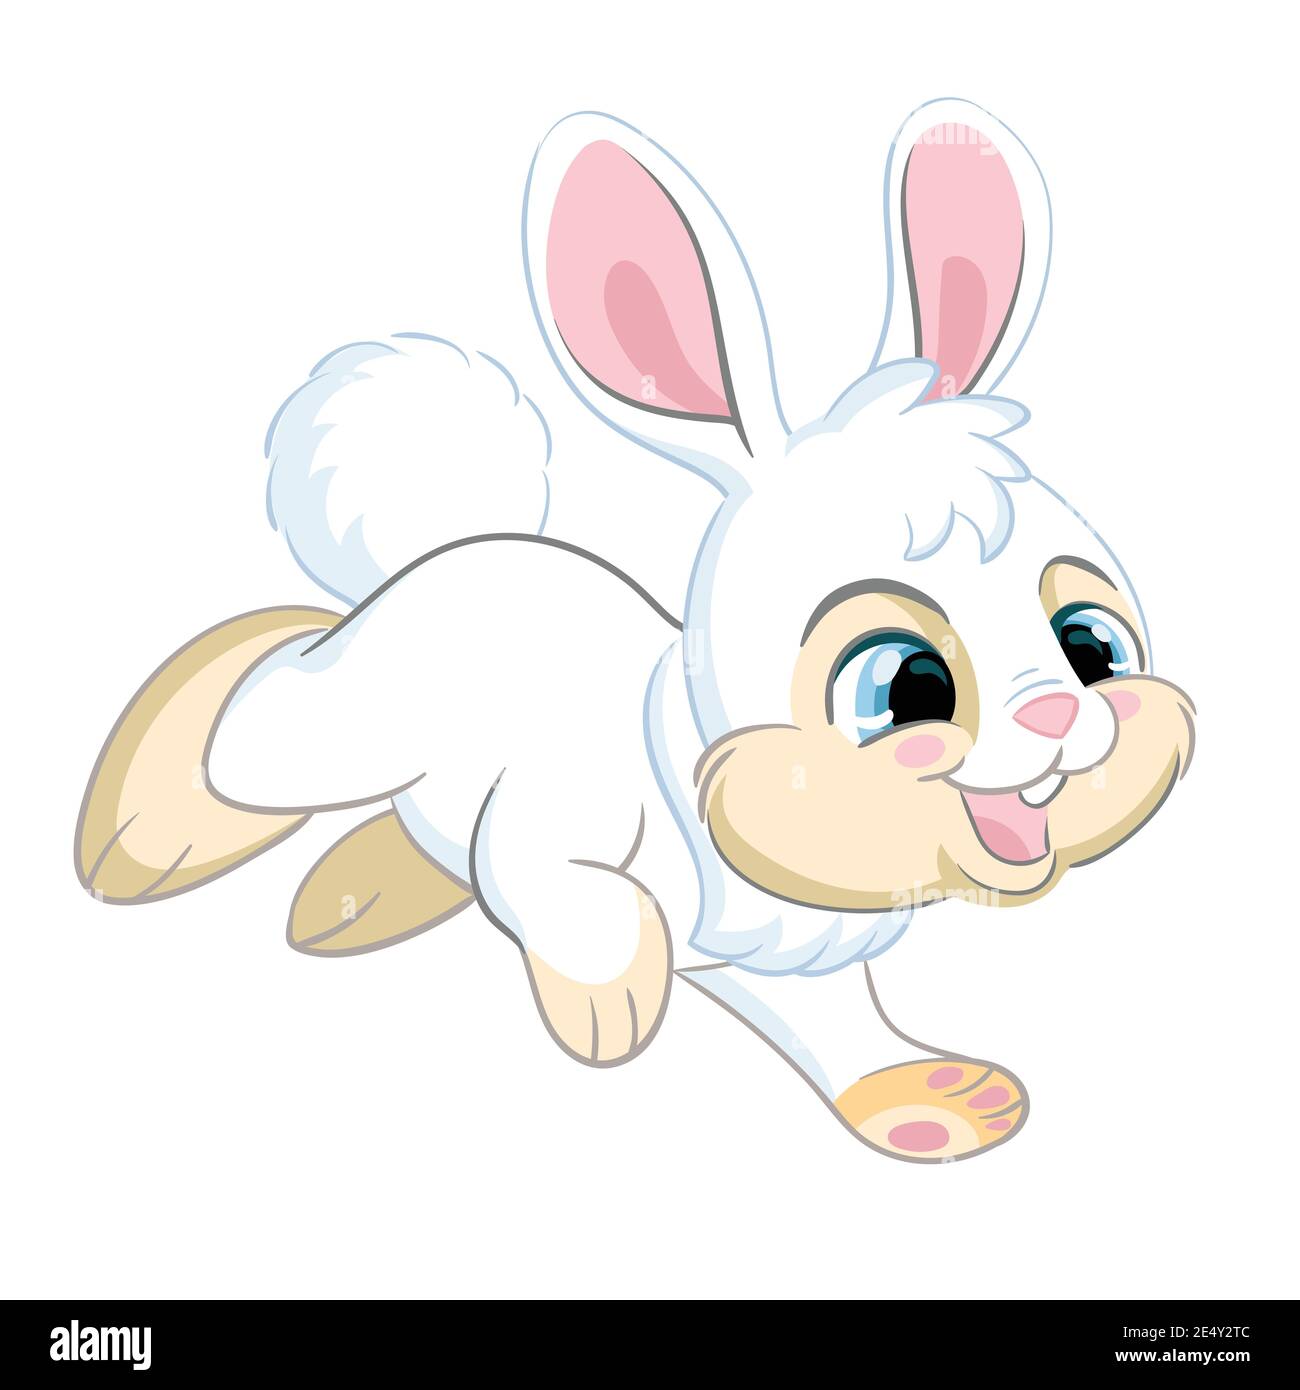 Rabbit running Cut Out Stock Images & Pictures - Alamy